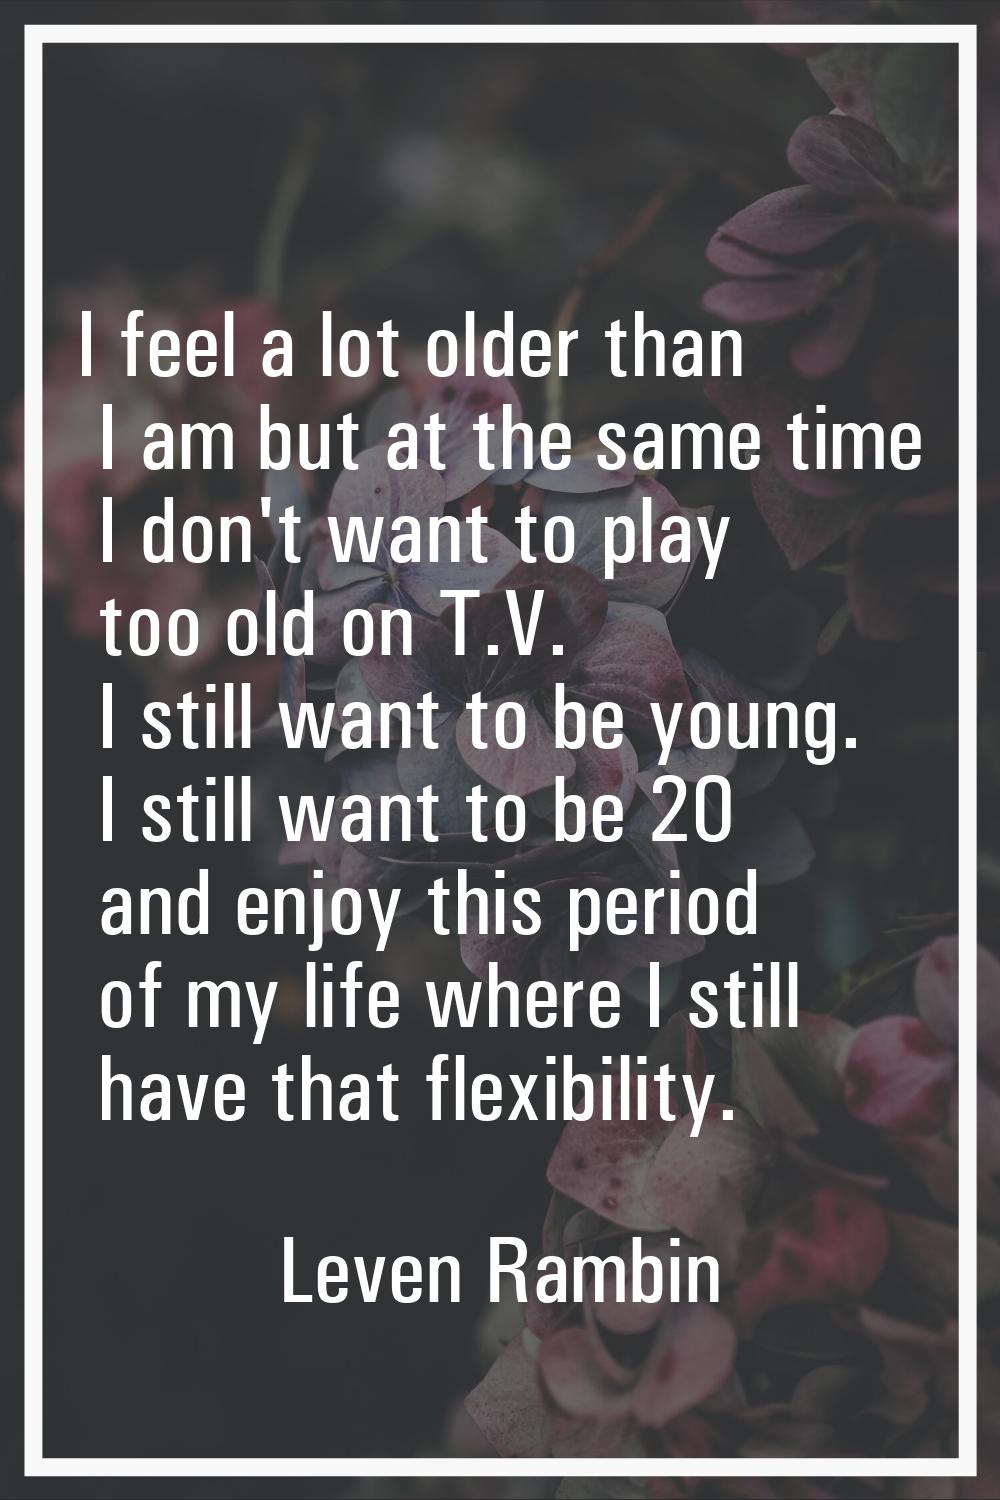 I feel a lot older than I am but at the same time I don't want to play too old on T.V. I still want